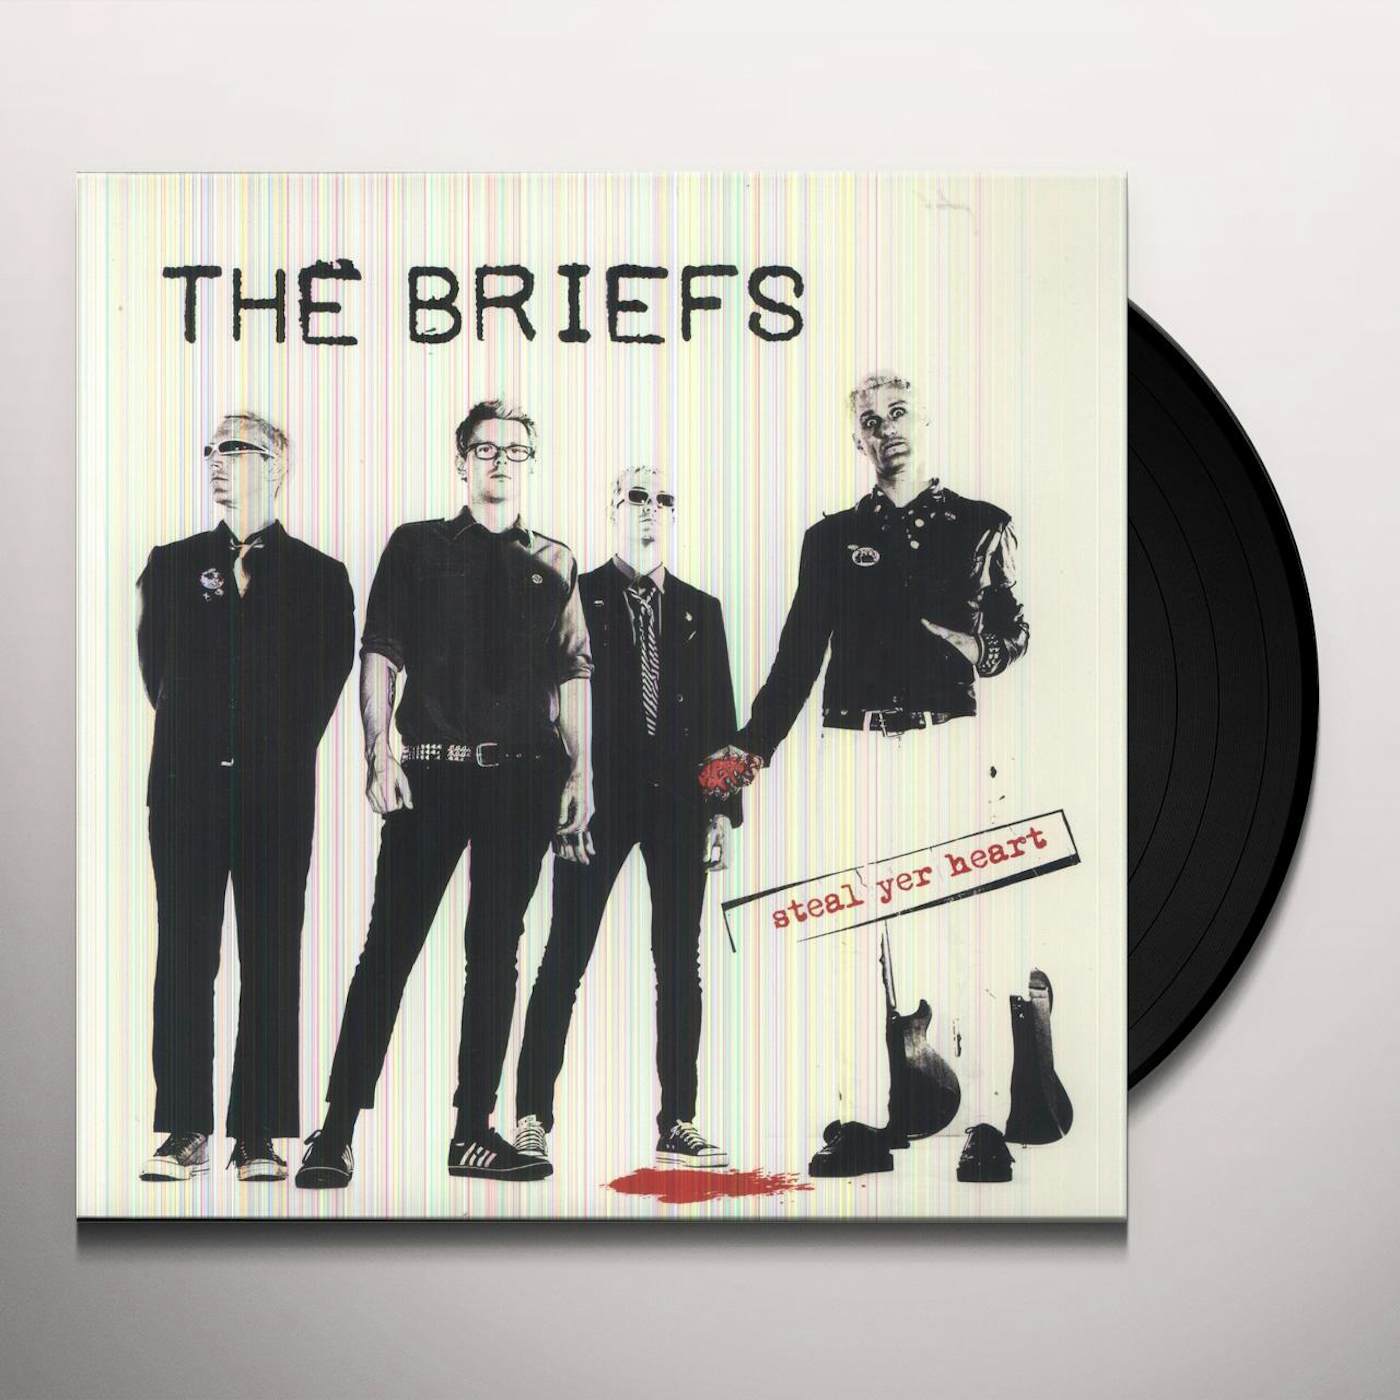 The Briefs Steal Yer Heart Vinyl Record